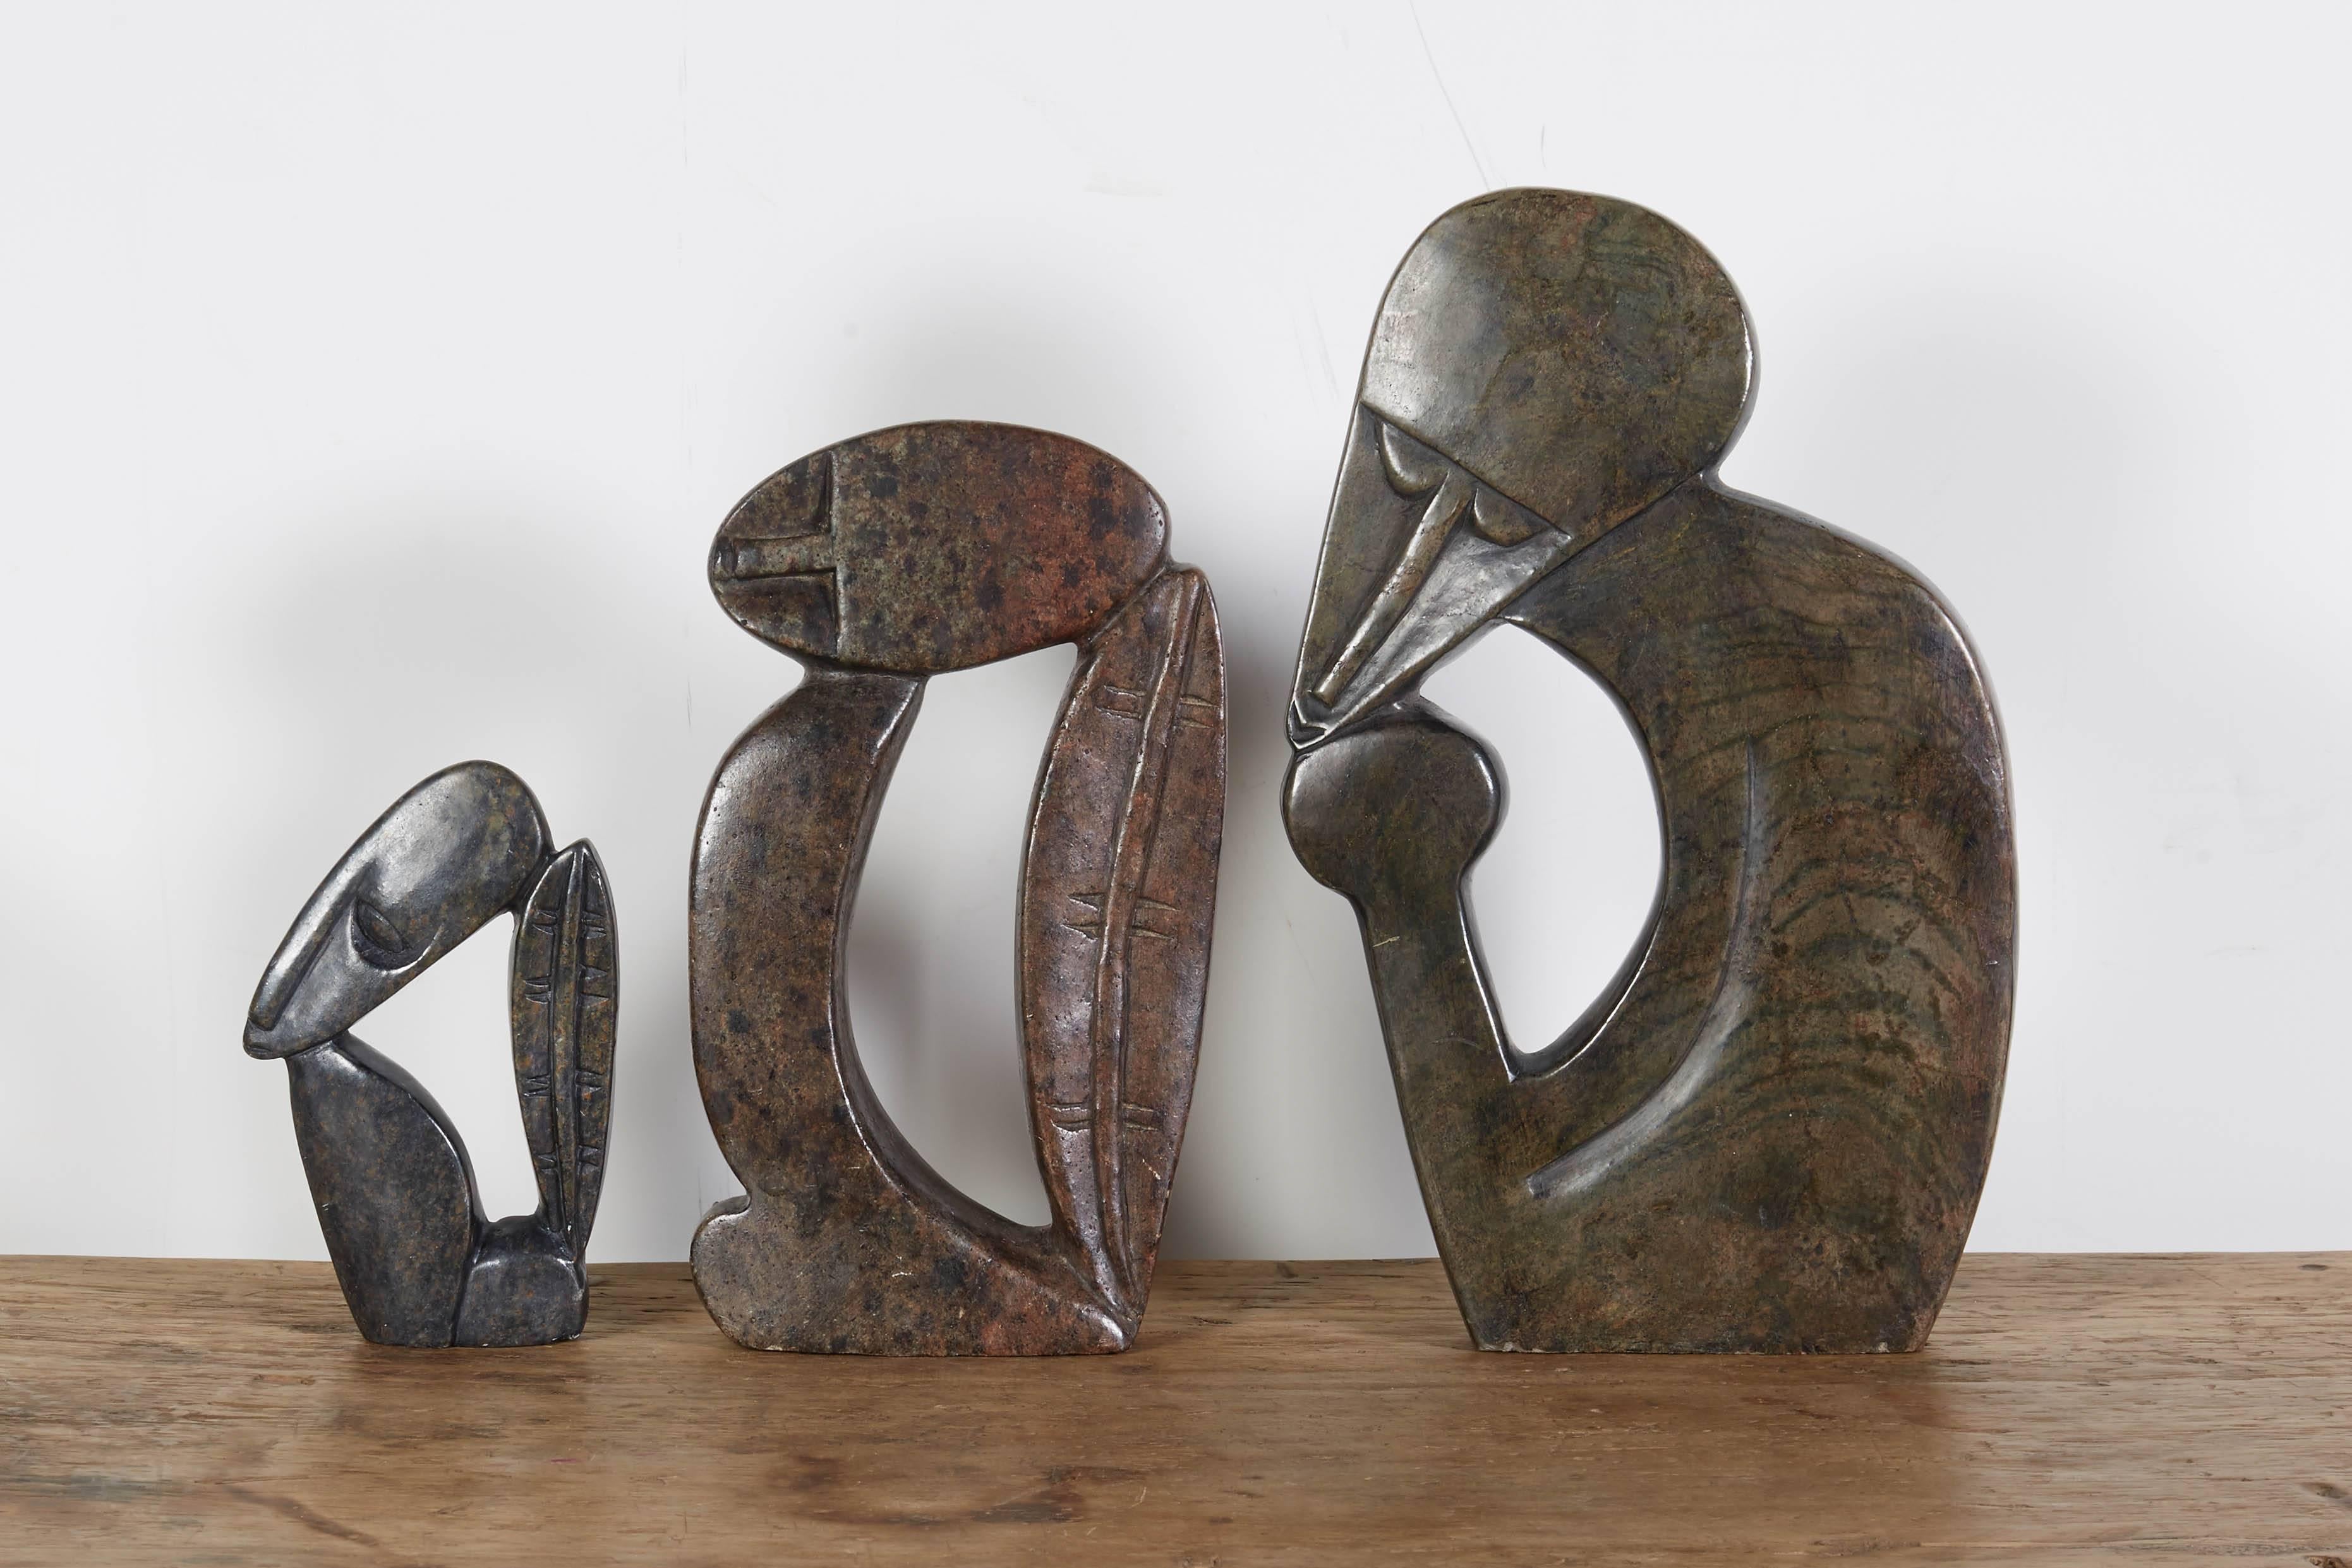 An expertly carved set of three striking stone sculptures from the Shona tribe of Zimbabwe. 
Dimensions: 
Large: L 7, D 1, H 11
Medium: L 5, D 1, H 9
Small: L 3, H 6.